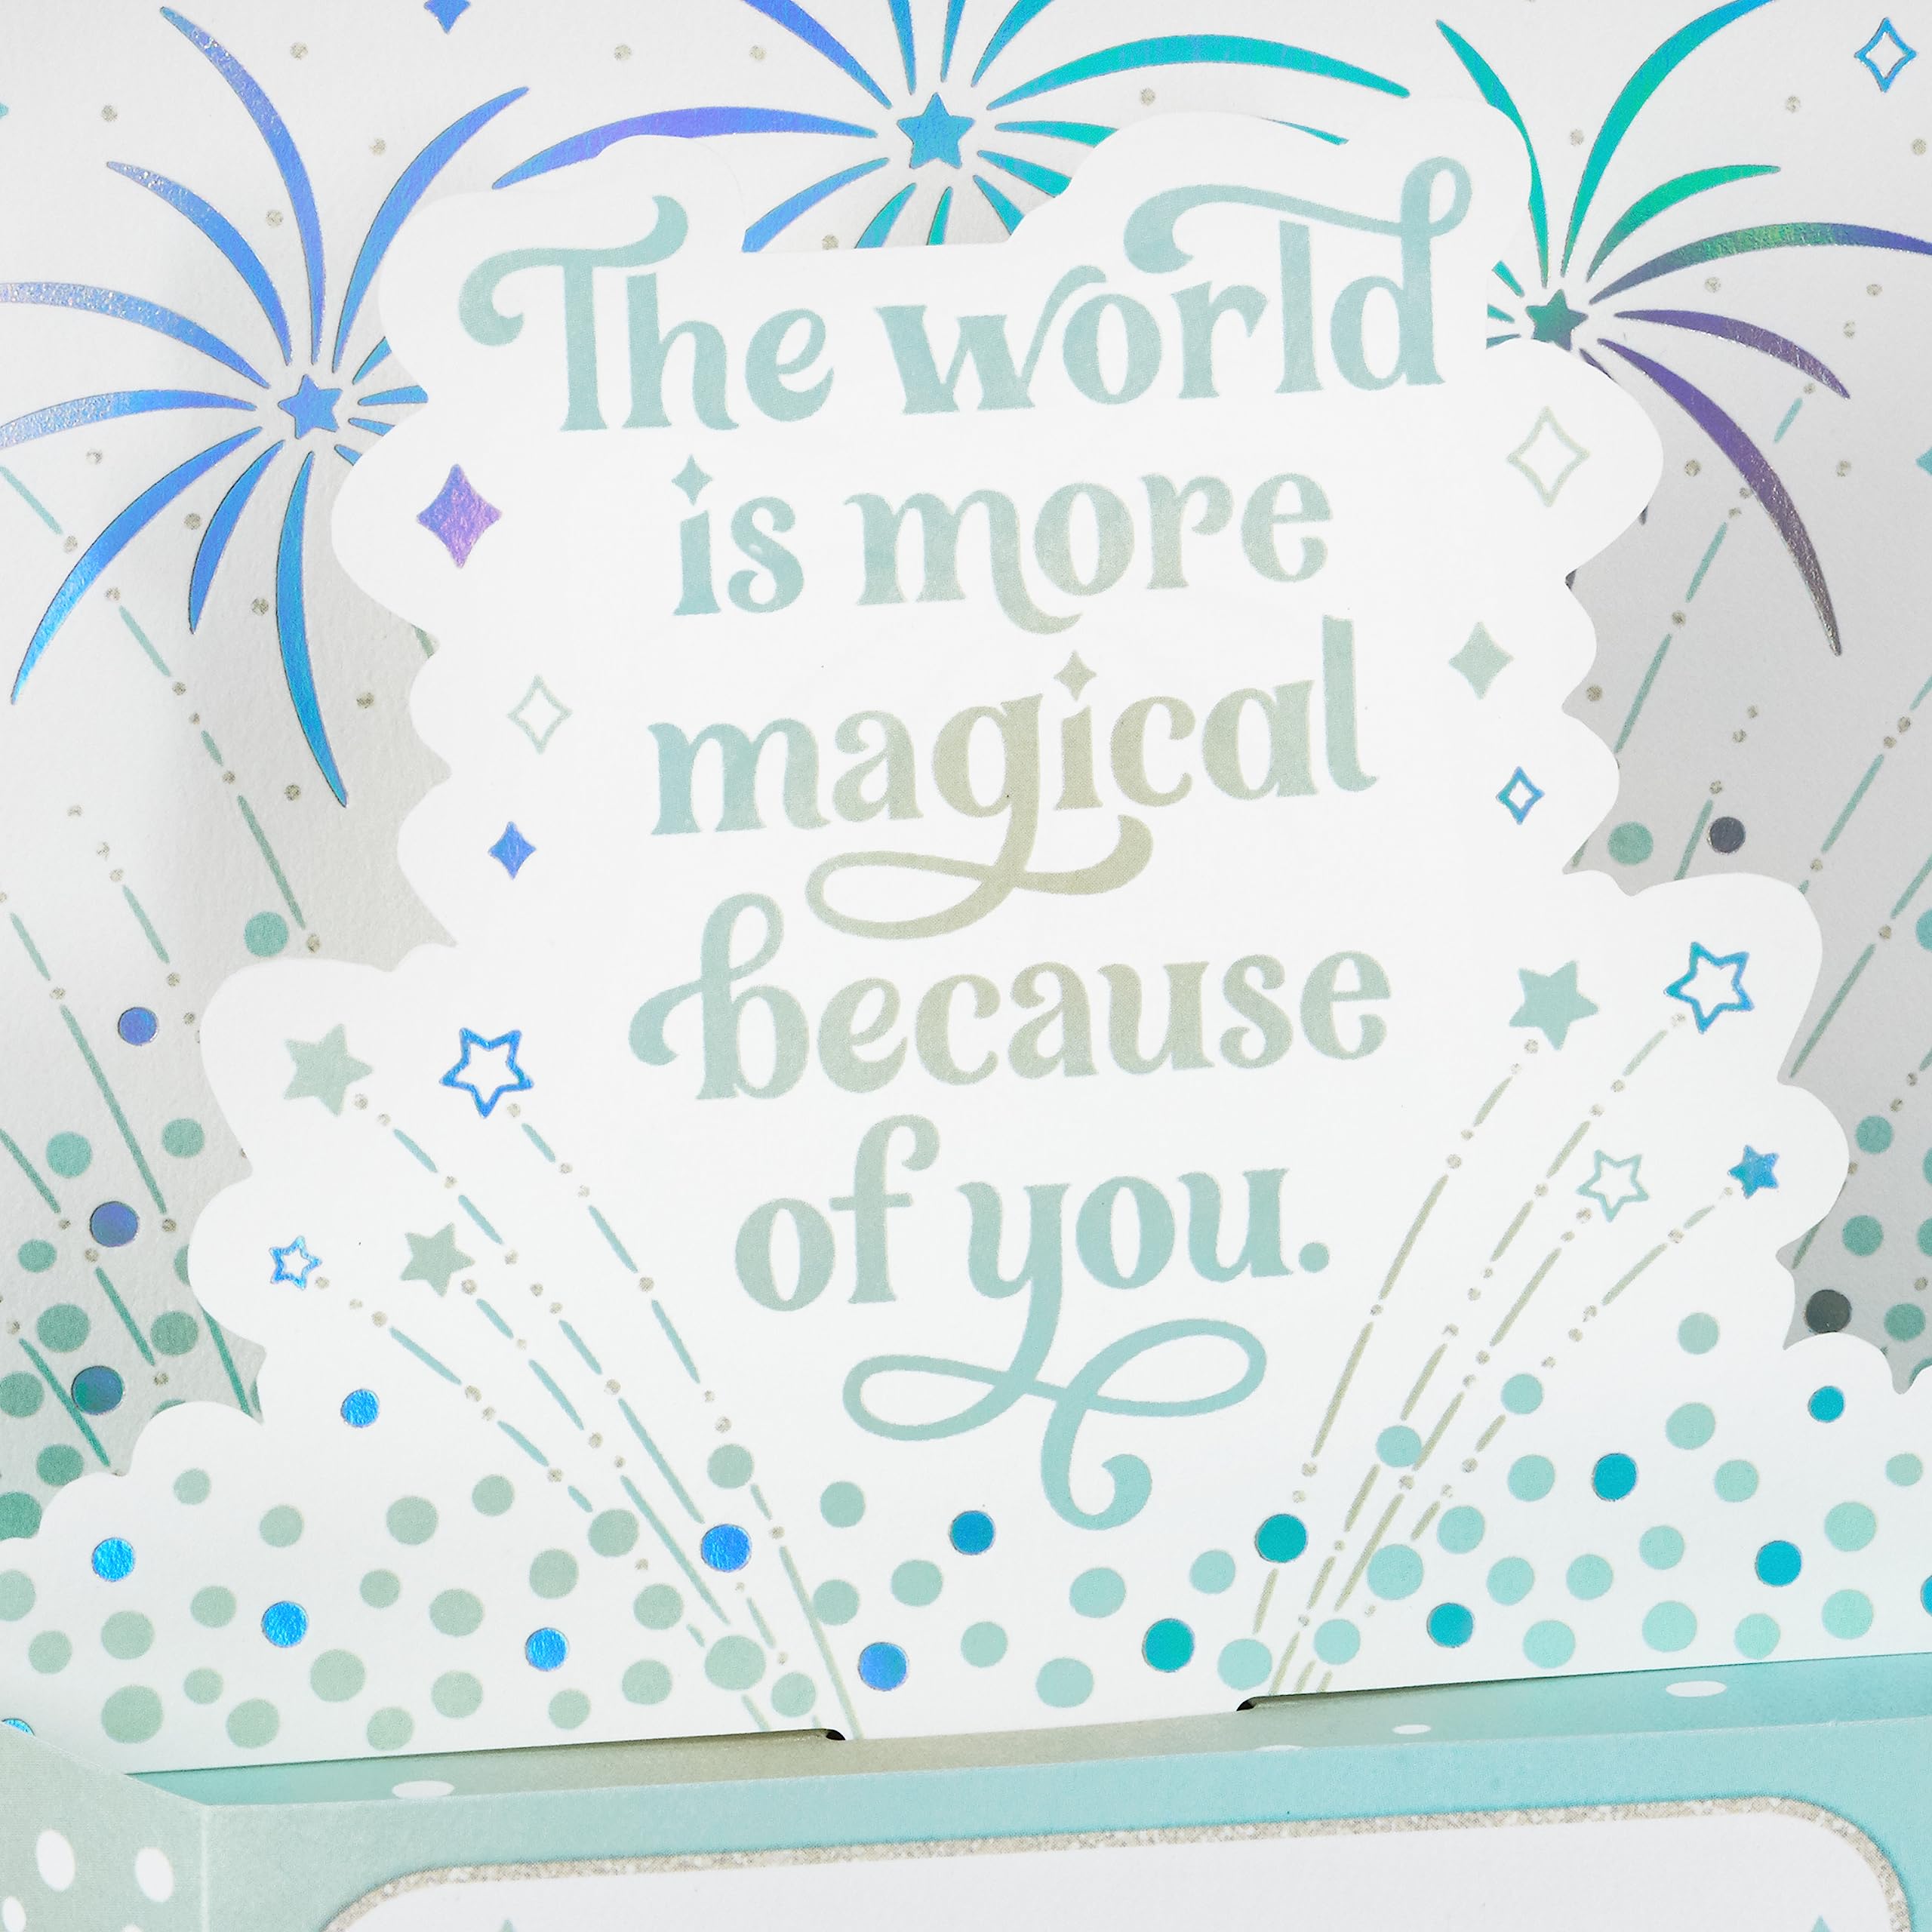 Hallmark Paper Wonder Disney Musical Pop Up Birthday Card, Encouragement Card, All Occasion Card with Lights (Mickey Mouse and Minnie Mouse)